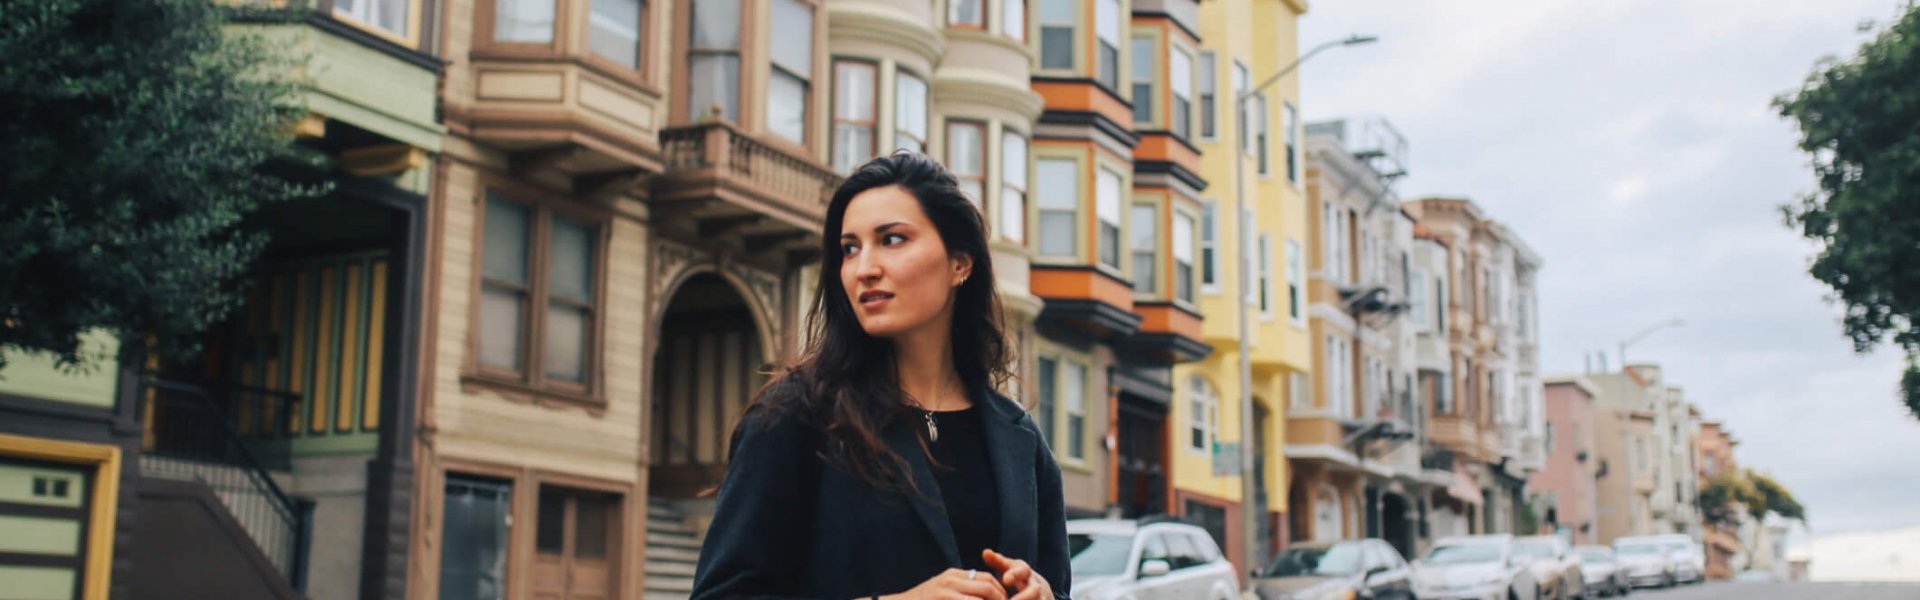 woman takes in the sites while walking among San Francisco's Painted Lady houses